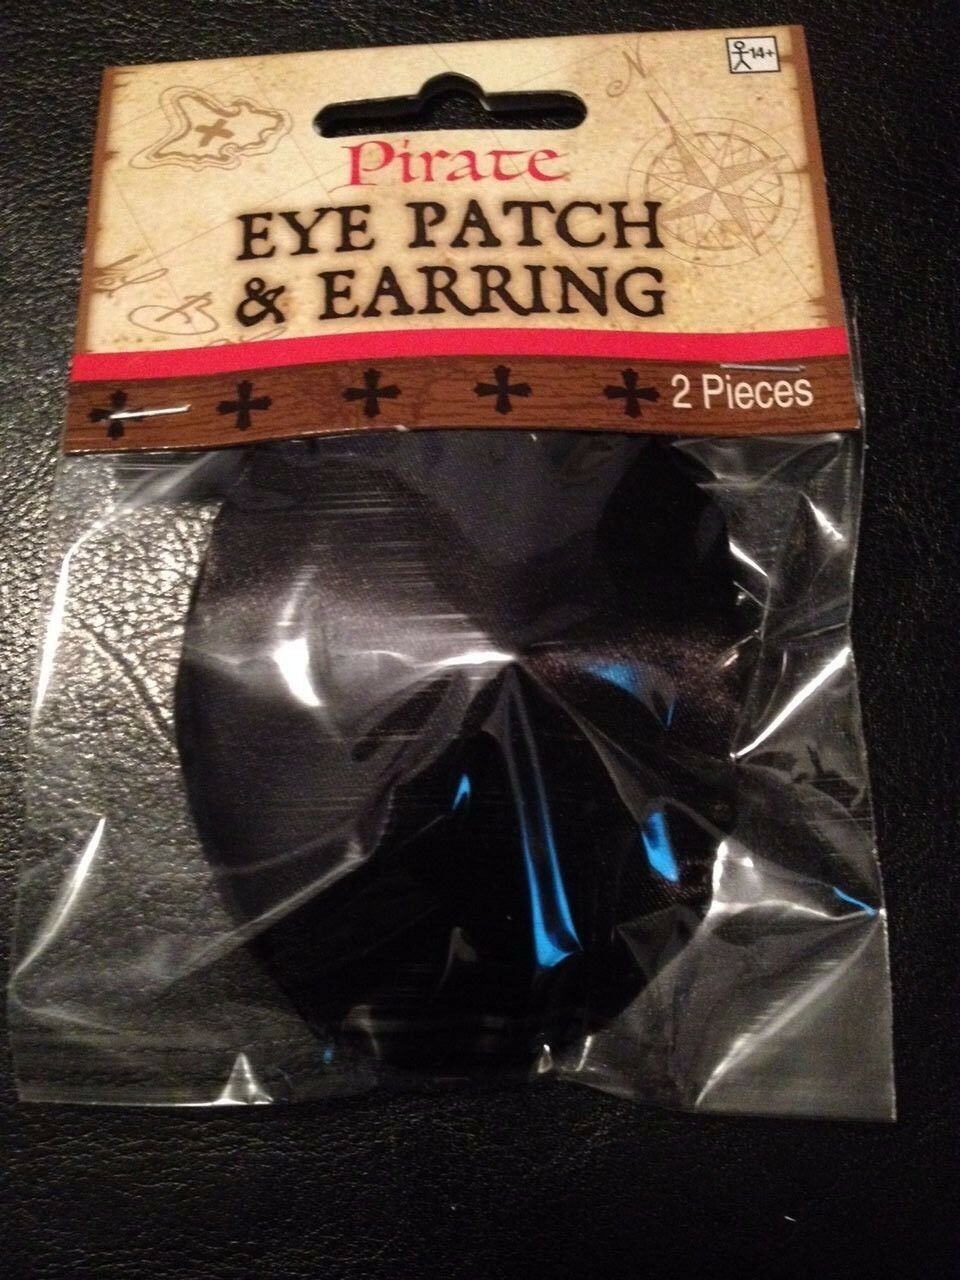 Pirate Eye Patch and Earring - Use For Cosplay, Dress-Up, Halloween, or Theater!